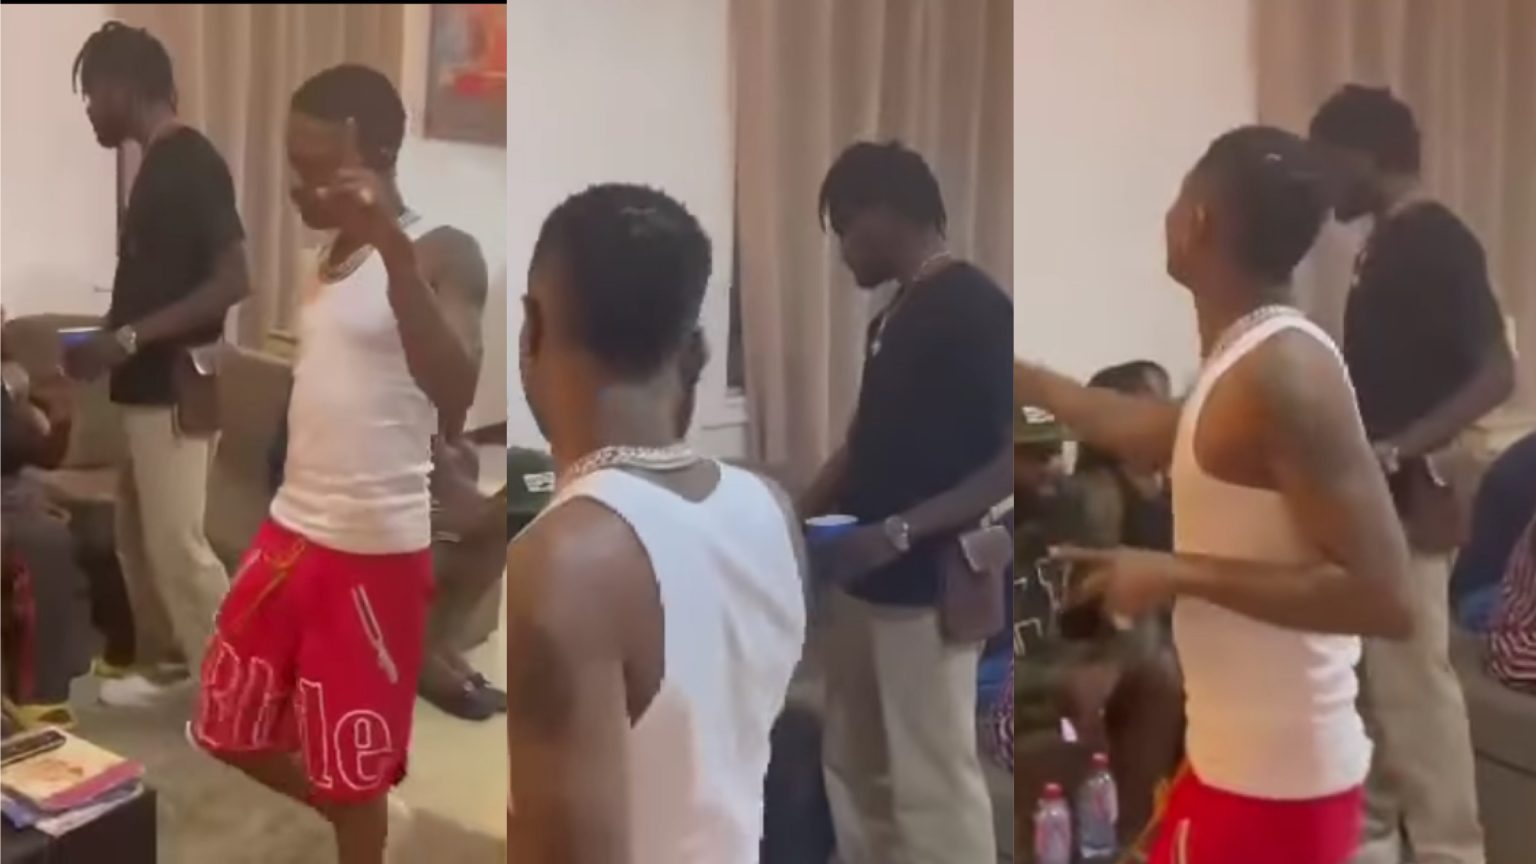 Wizkid sings Fameye’s praise song "word for word" as he party’s with him in Ghana